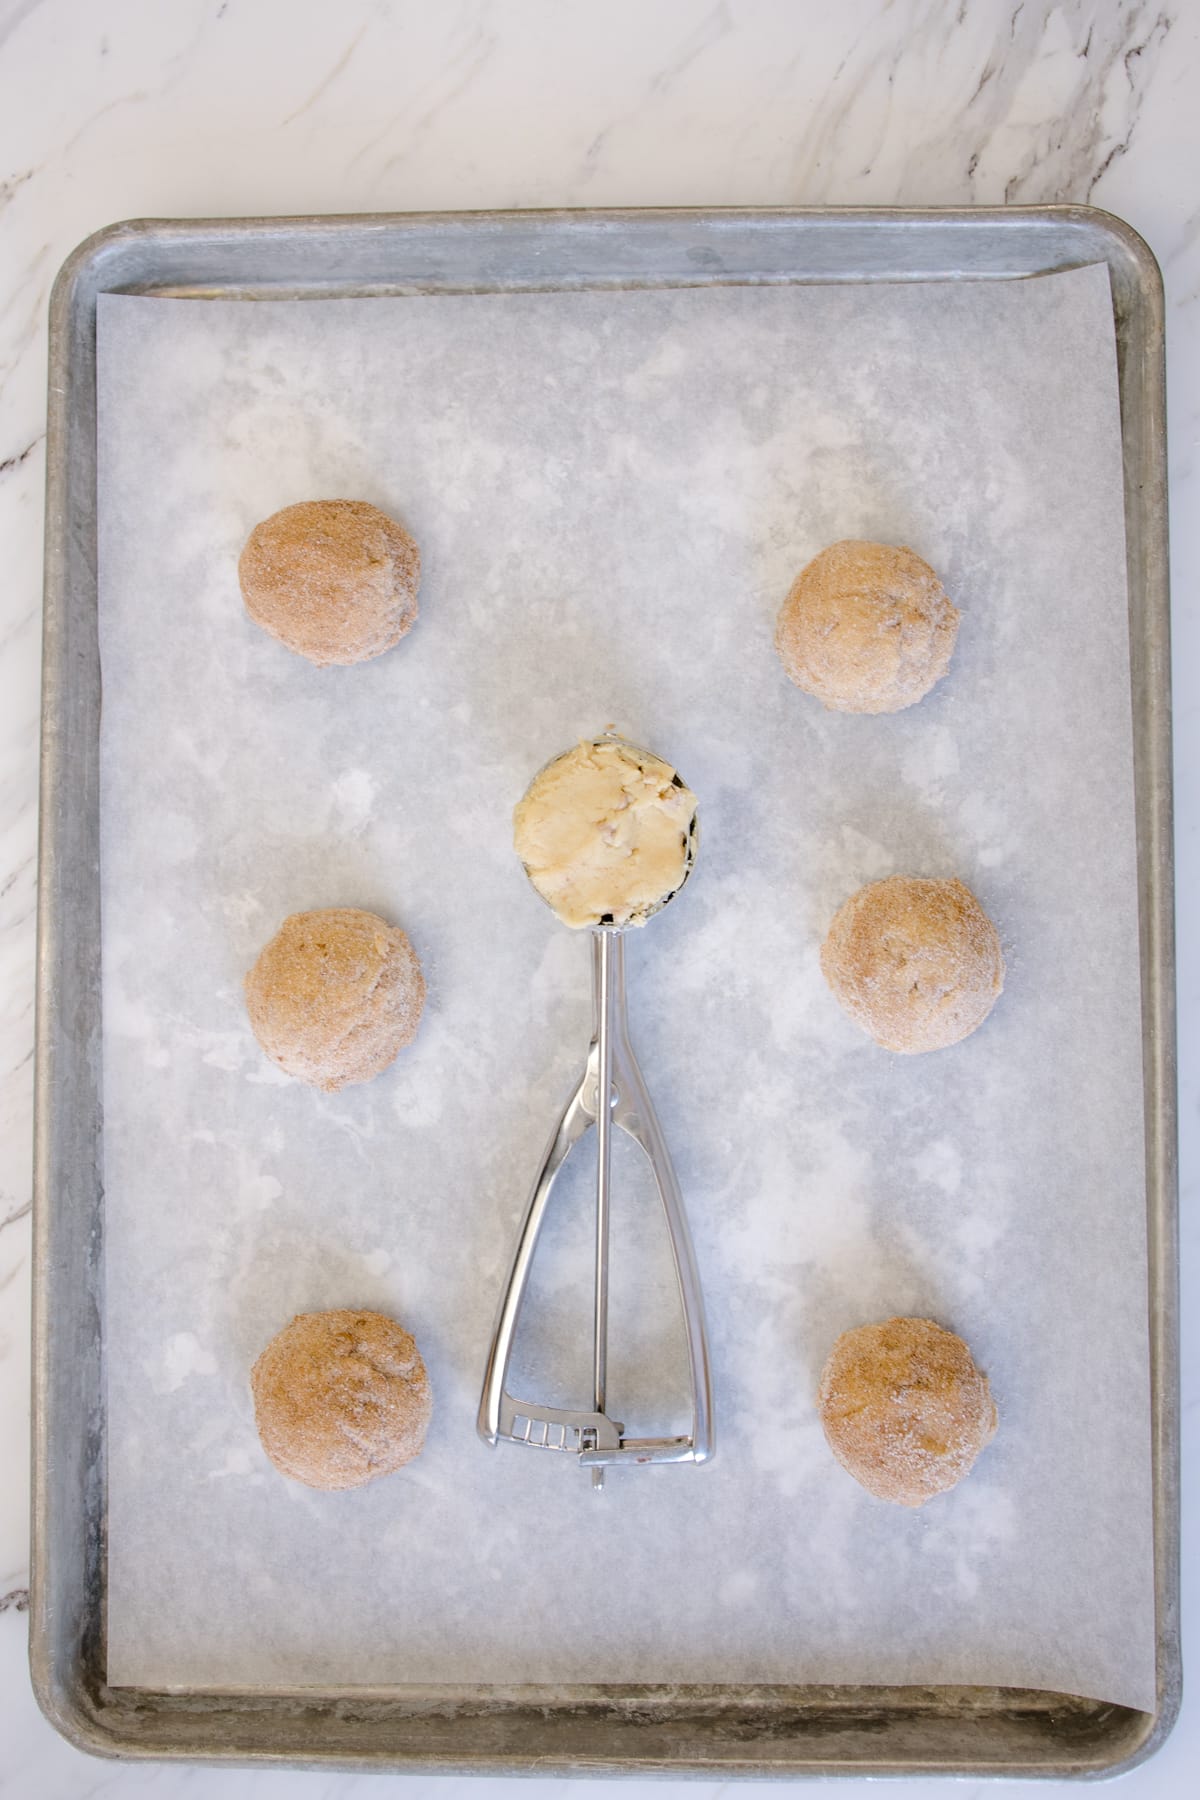 Top view of baking tray lined with parchment paper with Cinnamon Chip Cookie dough balls on it, the middle one still inside the cookie scoop.